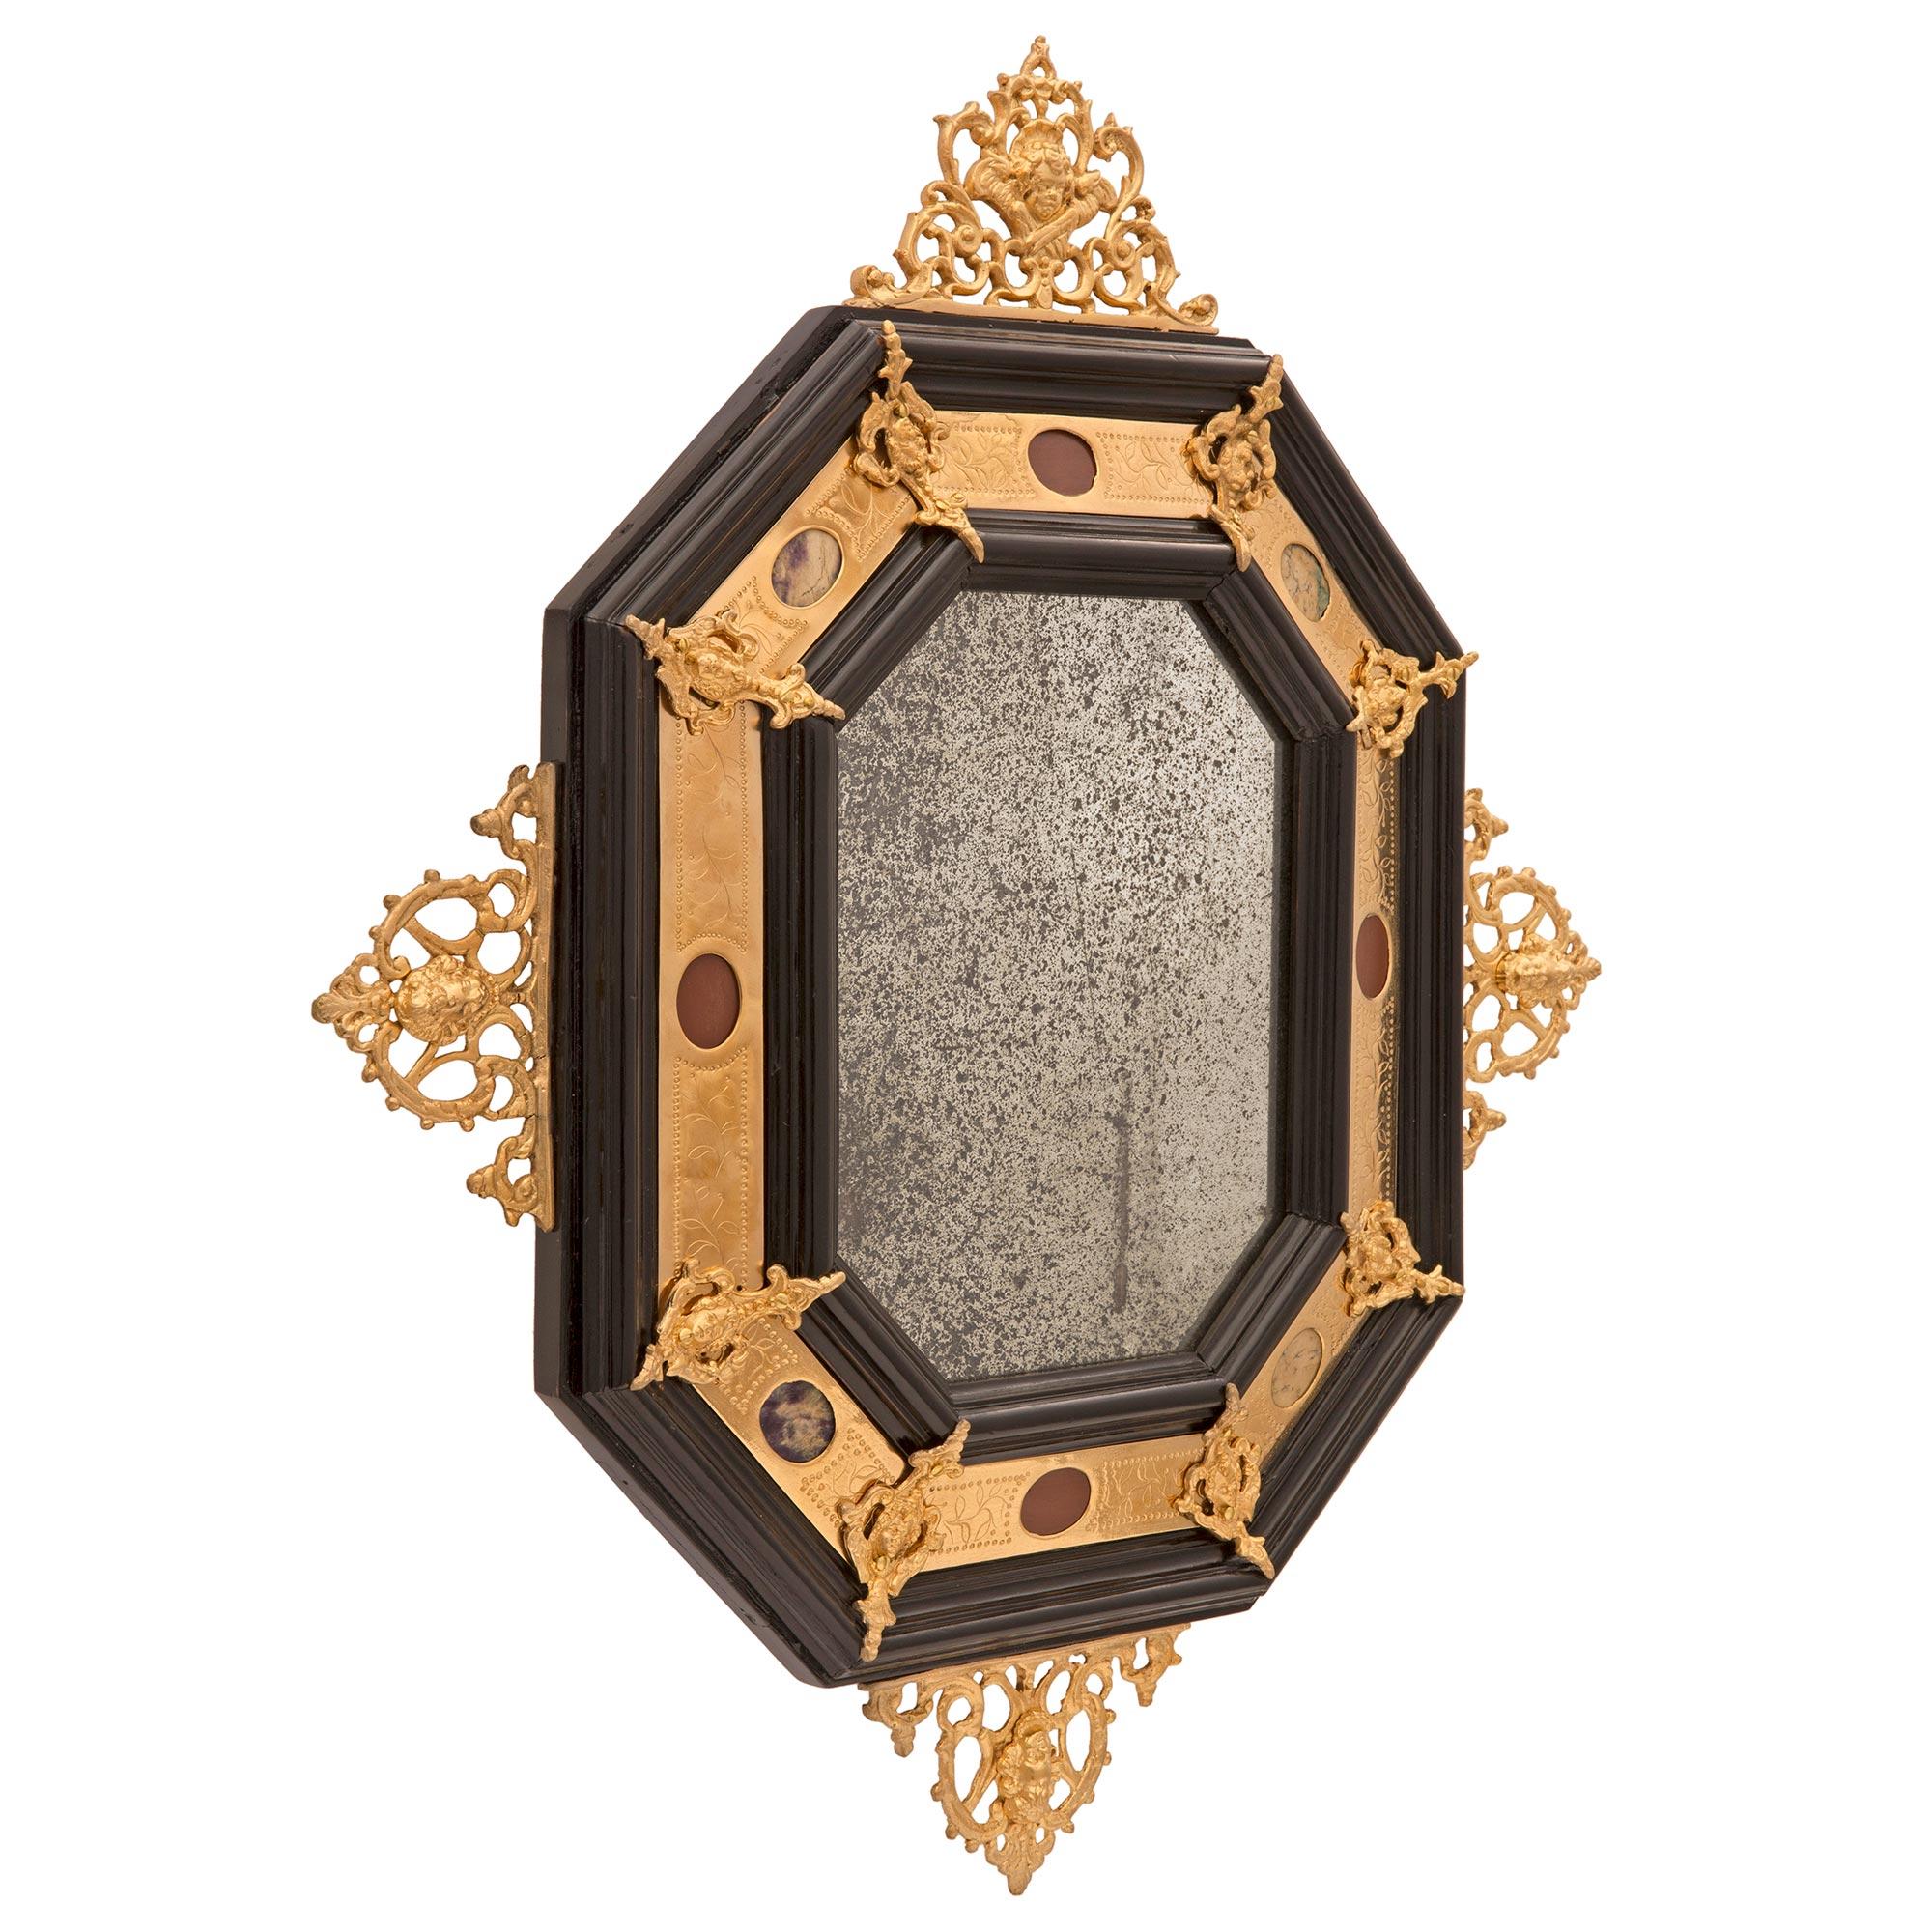 A stunning and extremely unique pair of Italian 19th century Renaissance st. Napoleon III period ebonized fruitwood, ormolu and marble inlaid mirrors. Each octagonal mirror retains its original mirror plate set within a most elegant mottled